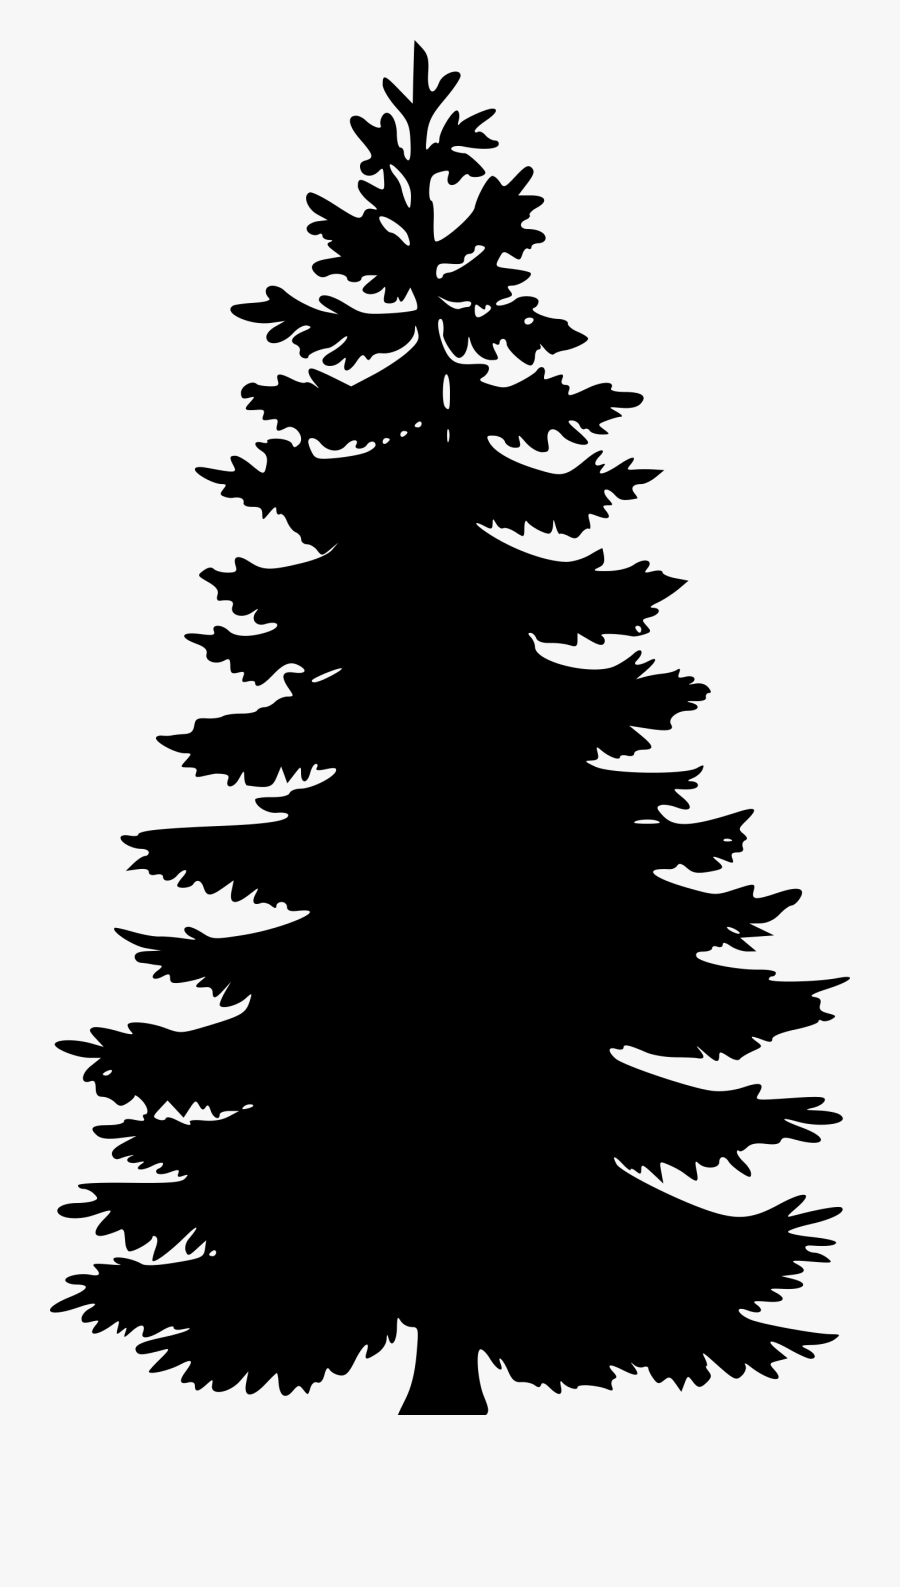 Tree Silhouettes By - Pine Tree Vector Png, Transparent Clipart